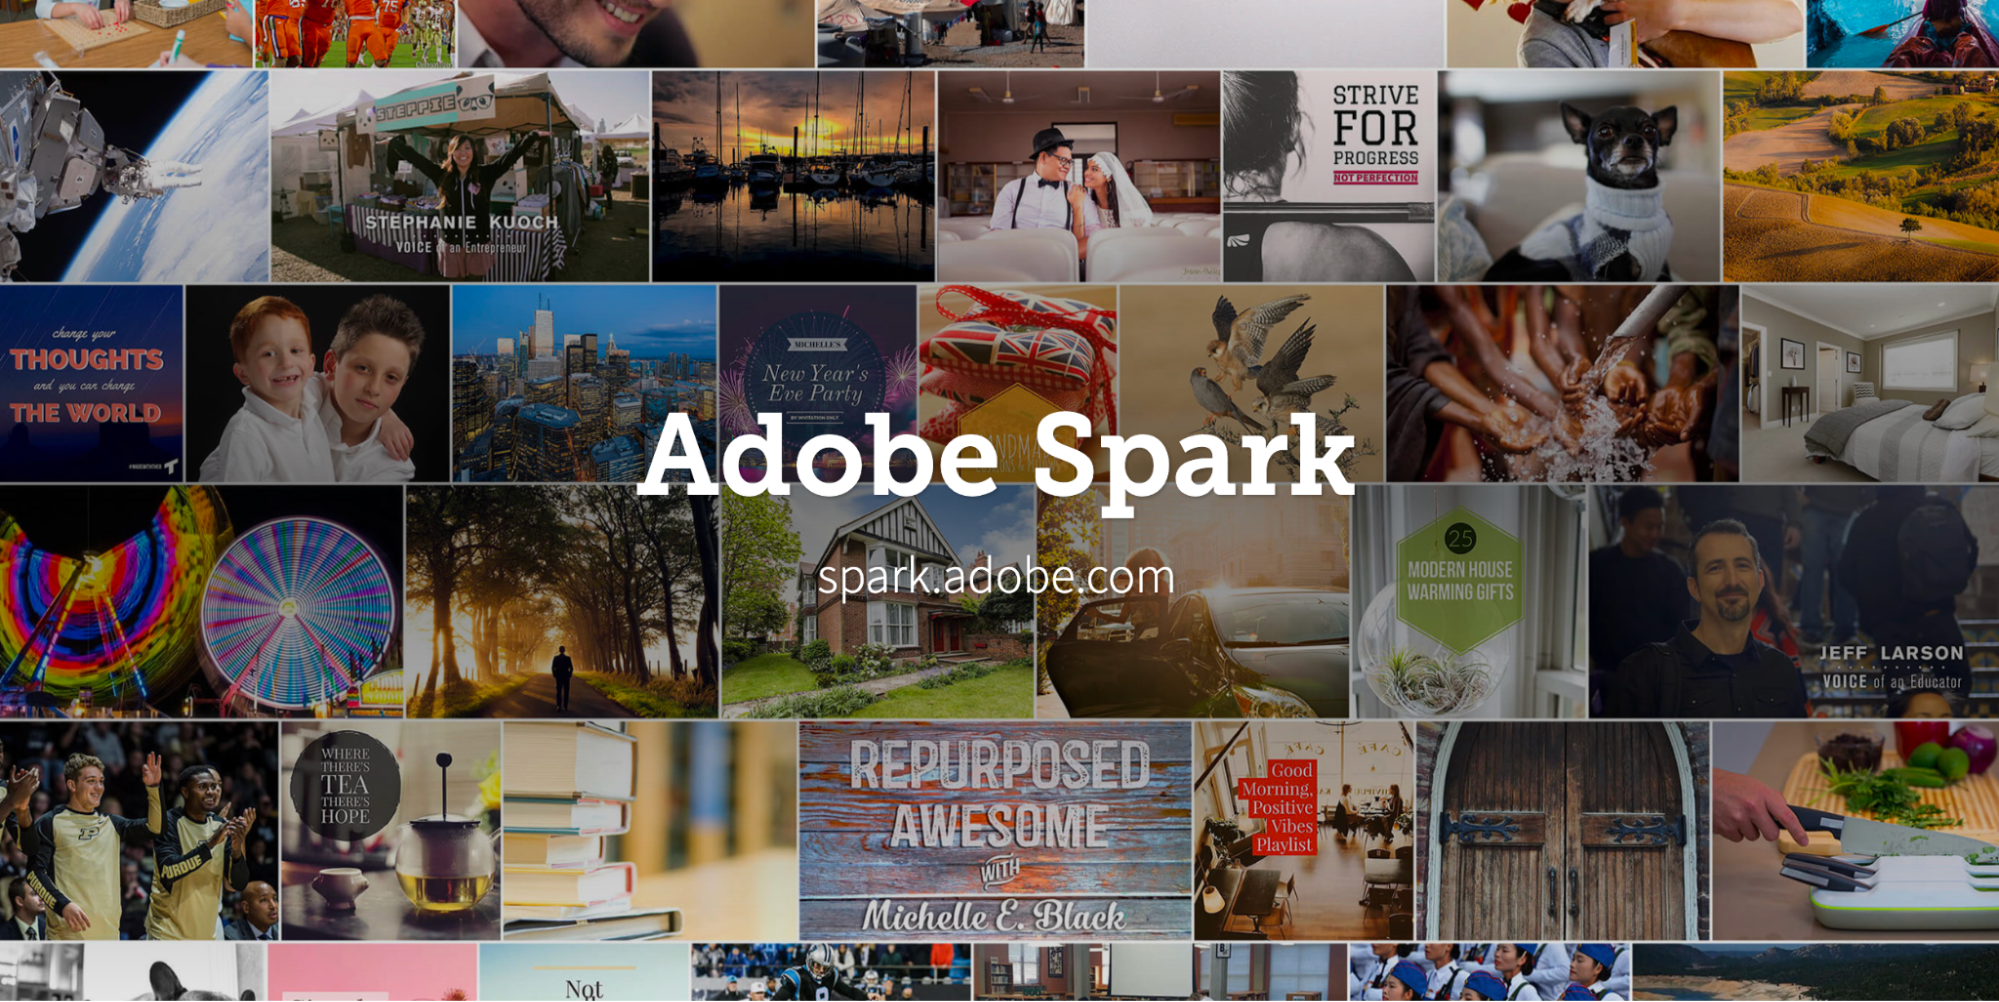 Marketers can use AI tools like Adobe Spark to share stories and content visually, creating greater impact than with text alone